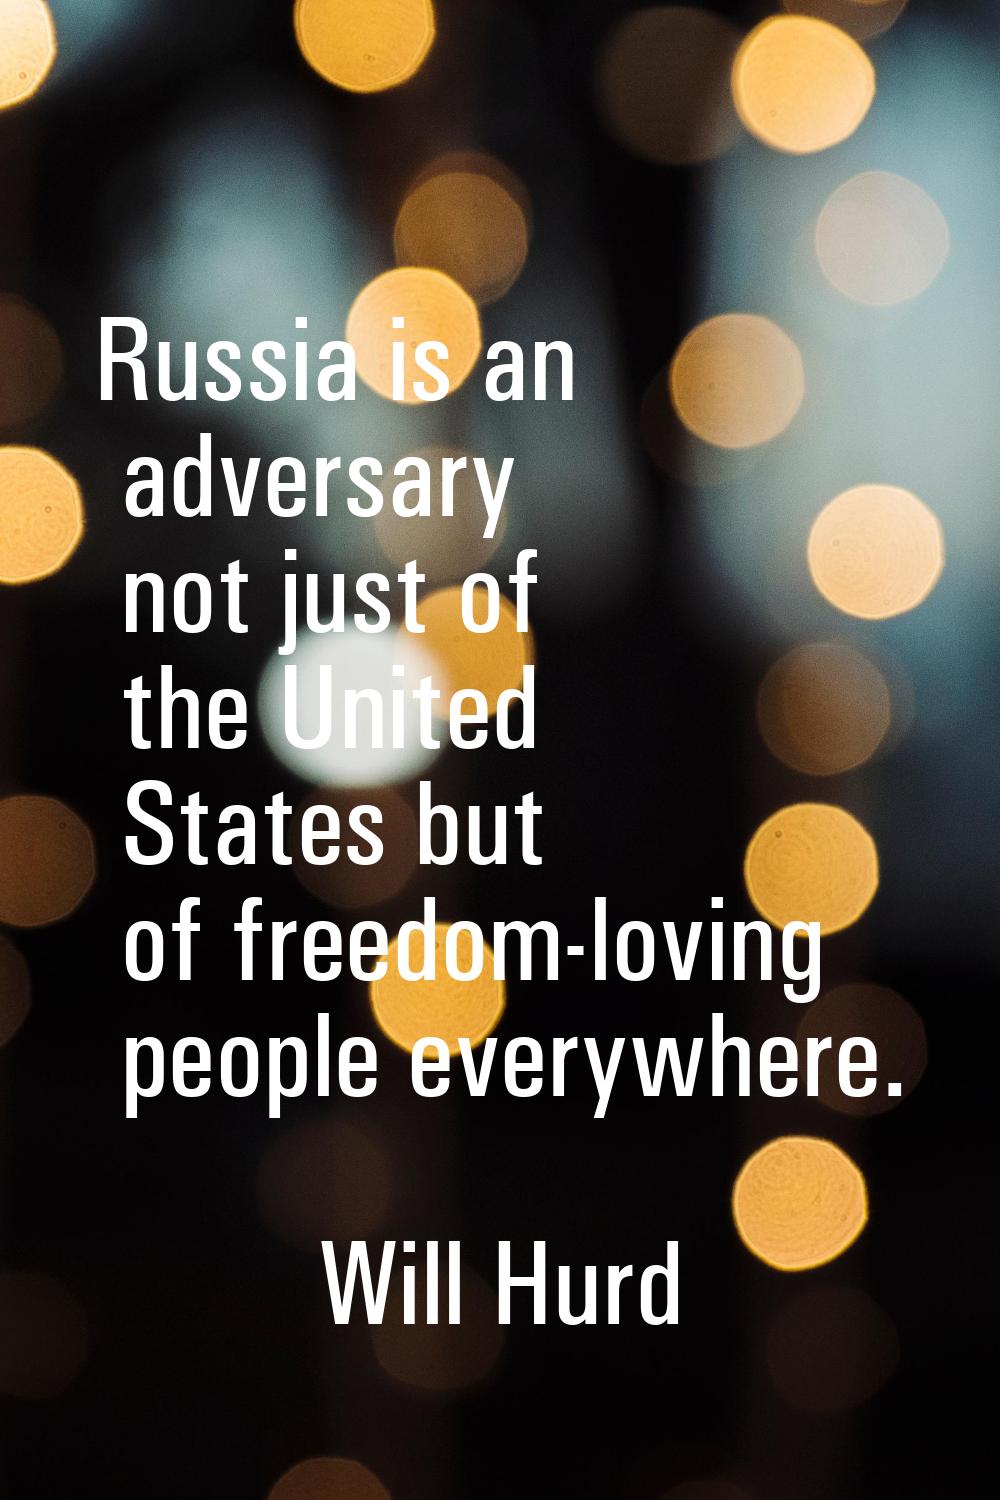 Russia is an adversary not just of the United States but of freedom-loving people everywhere.